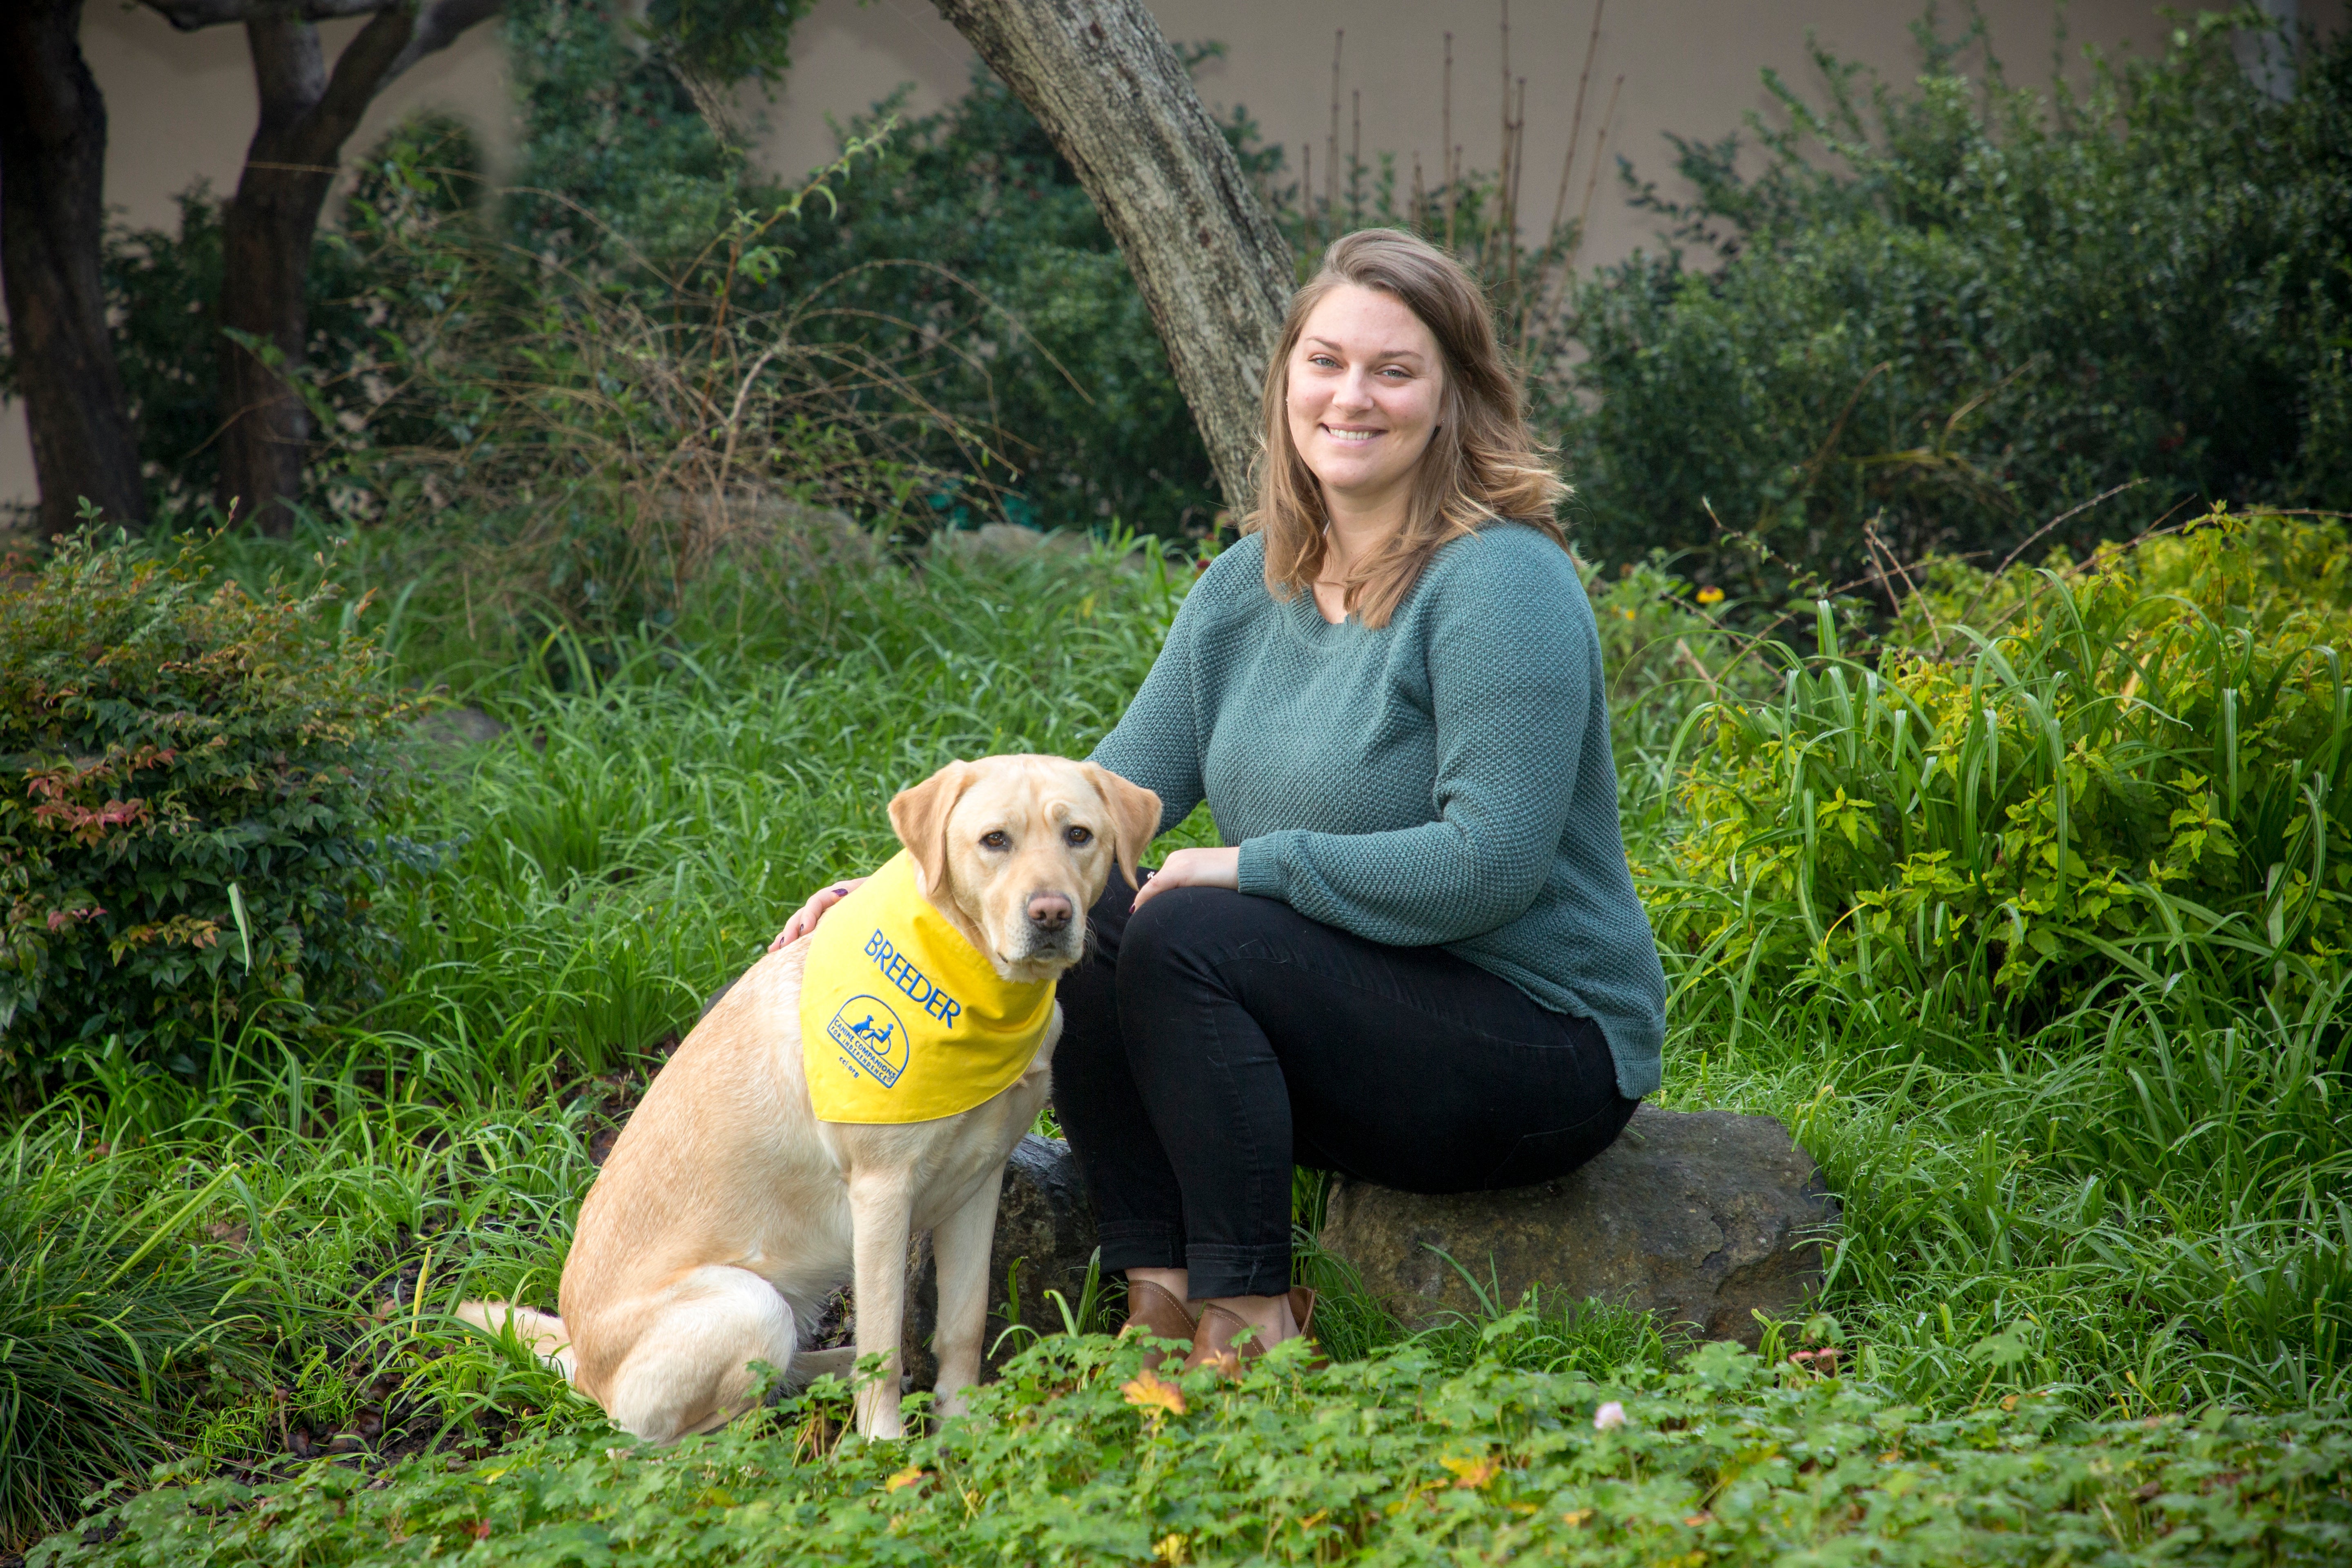 Kim sits next to a yellow lab who is wearing a yellow breeder bandana